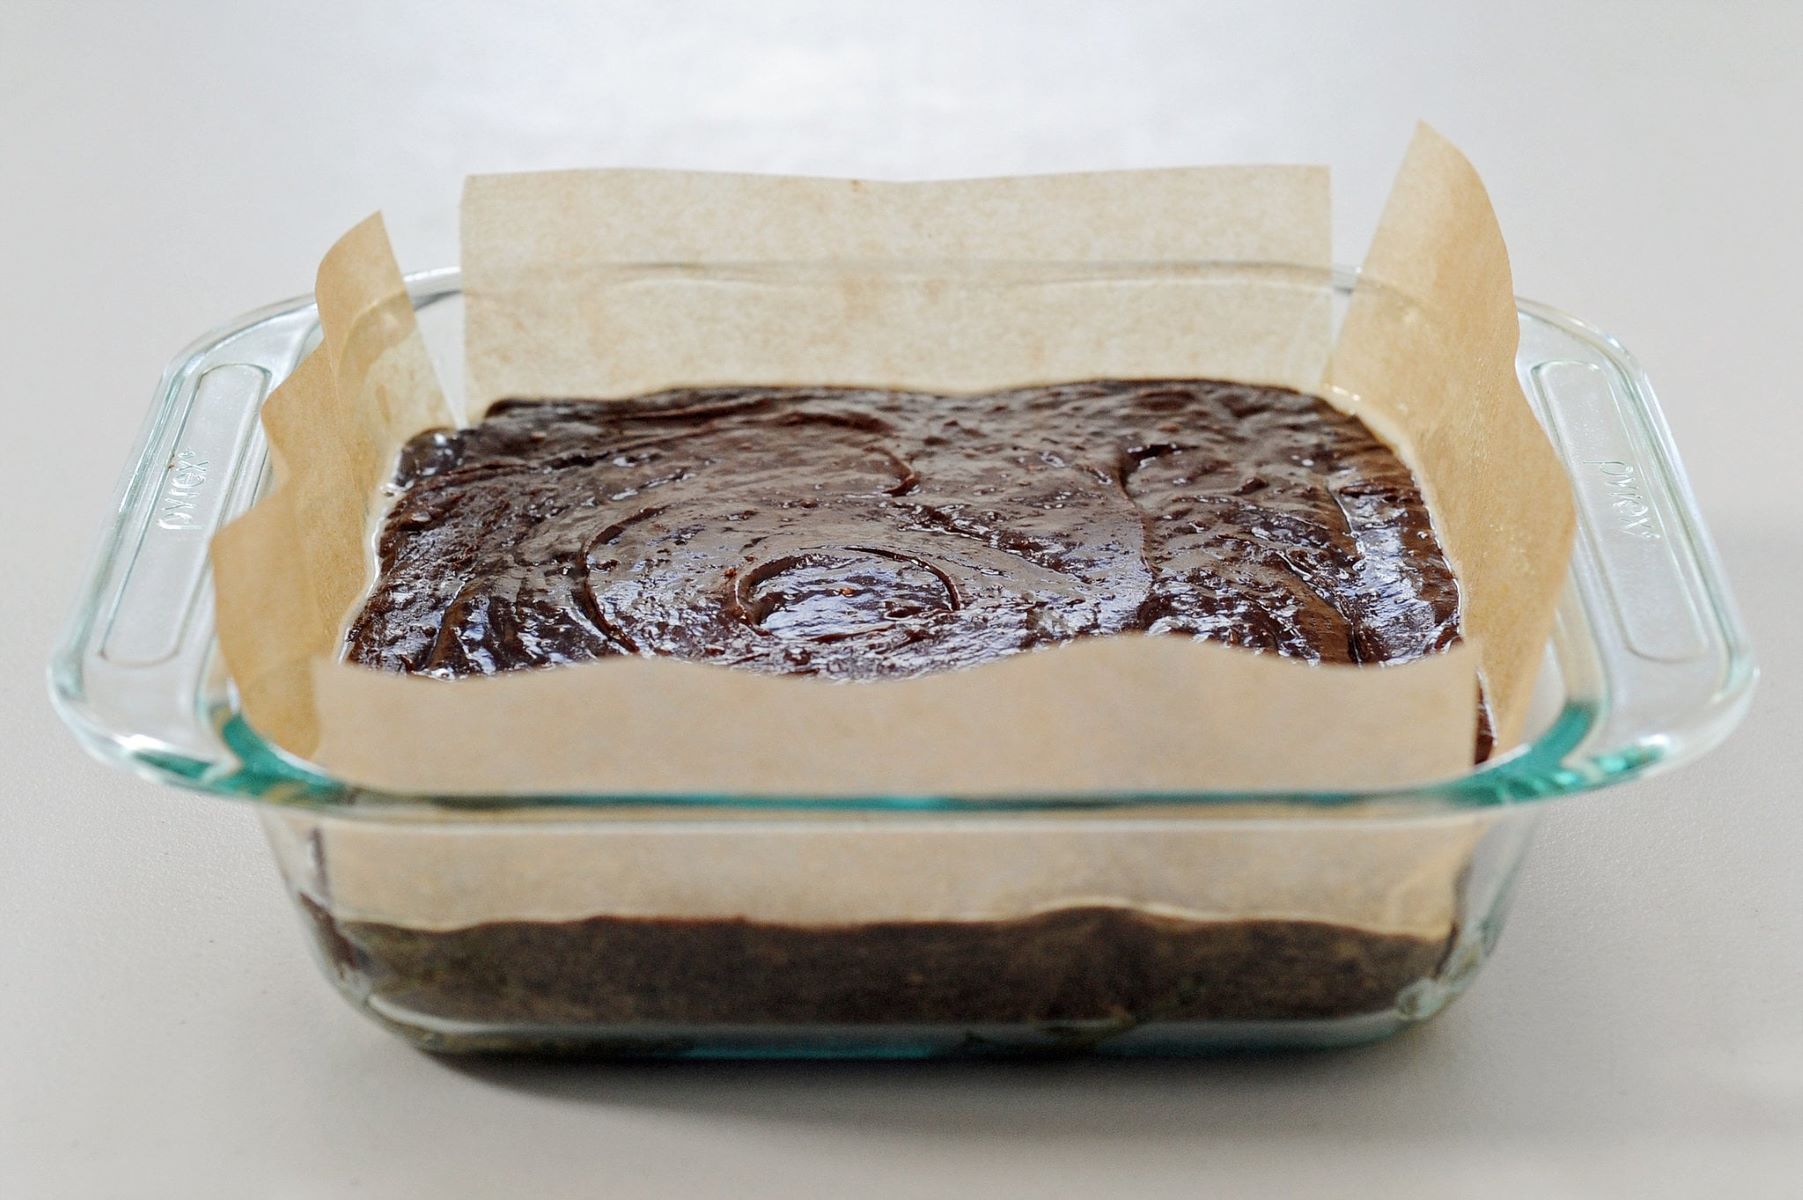 How Long To Bake Brownies In An 8×8 Glass Pan?